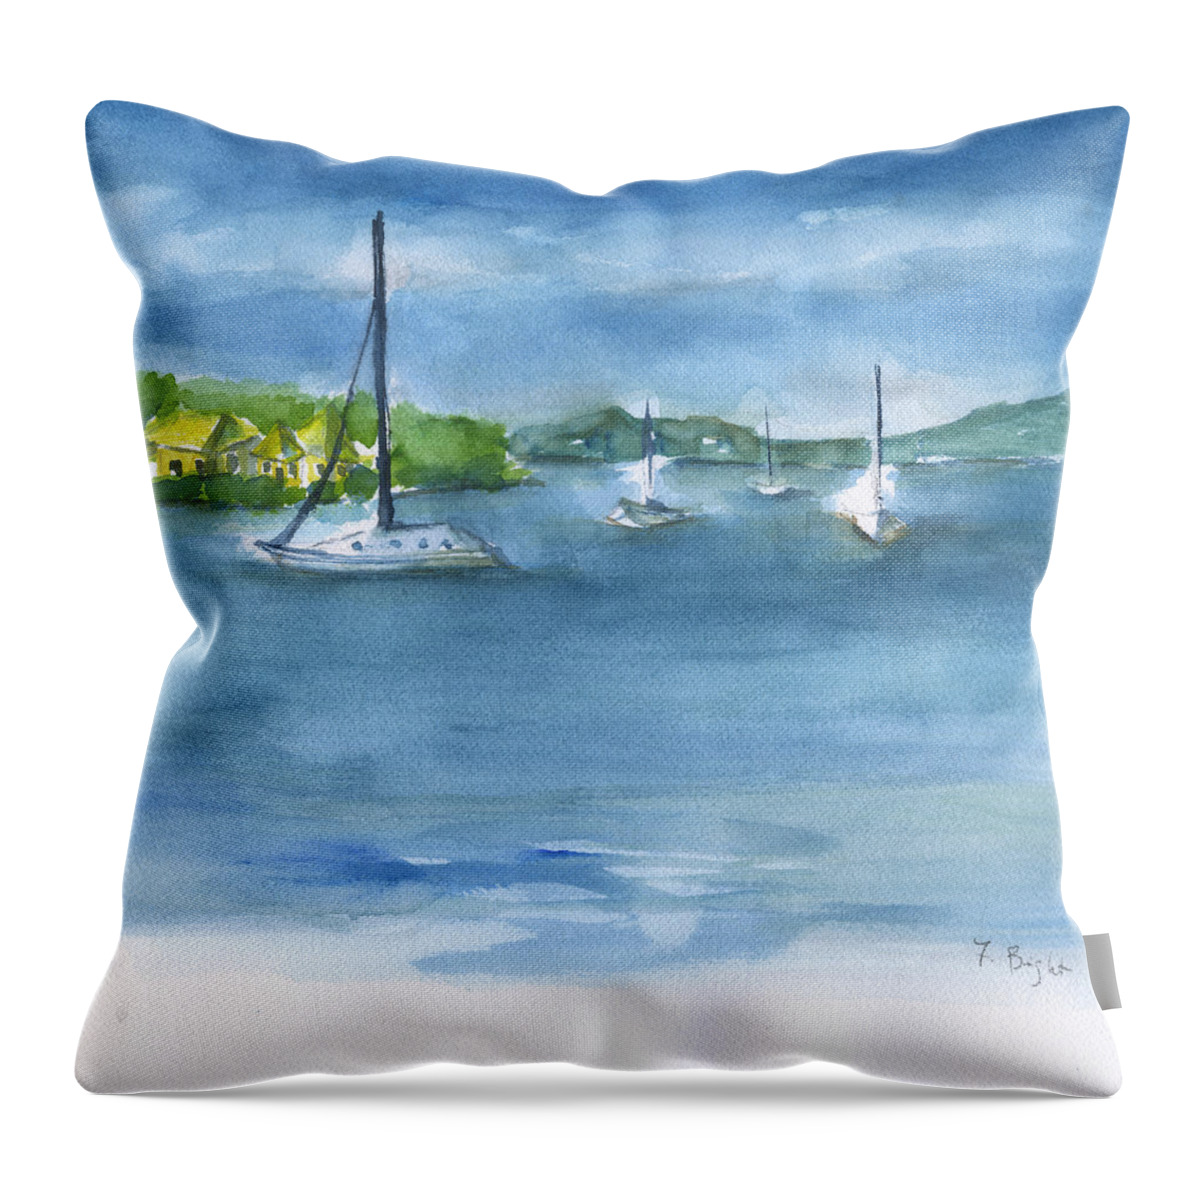 Sailboats At White Beach Throw Pillow featuring the painting Sailboats At St. Thomas by Frank Bright